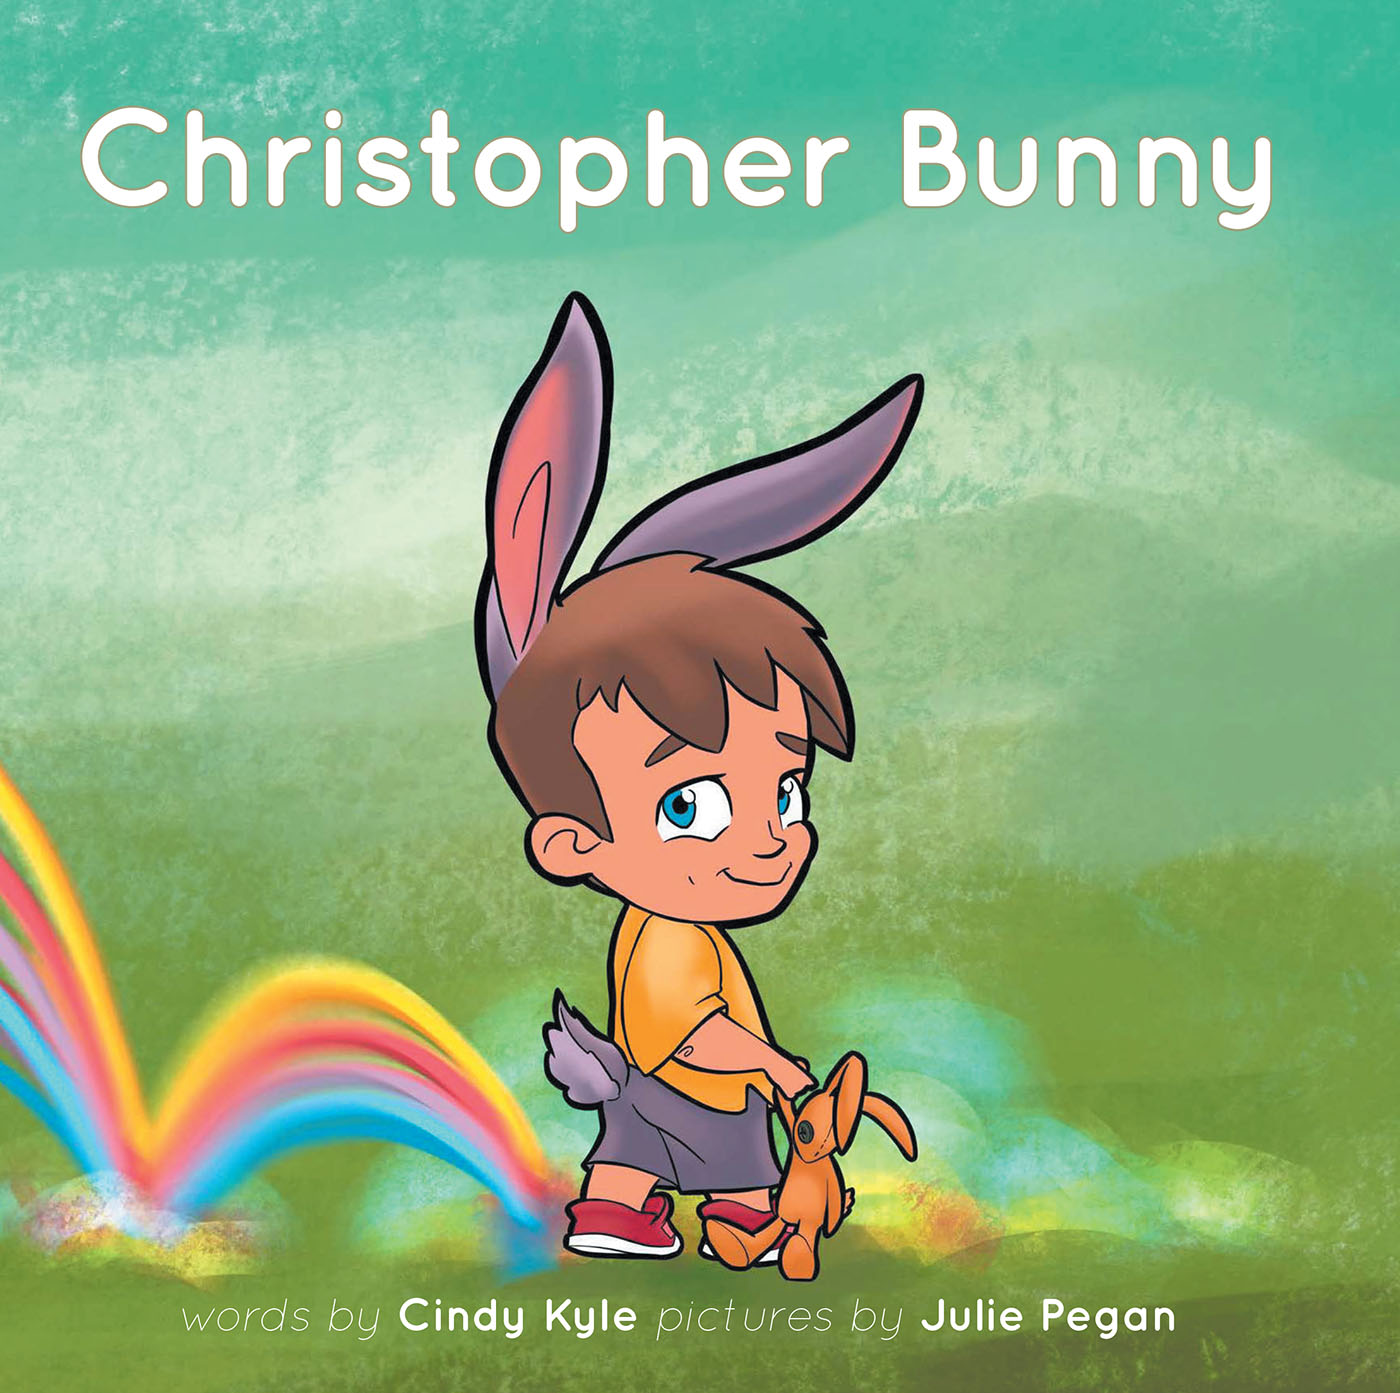 Cindy Kyle’s Newly Released "Christopher Bunny" is a Charming Story of an Imaginative Little Boy and a Loving Father’s Adventures